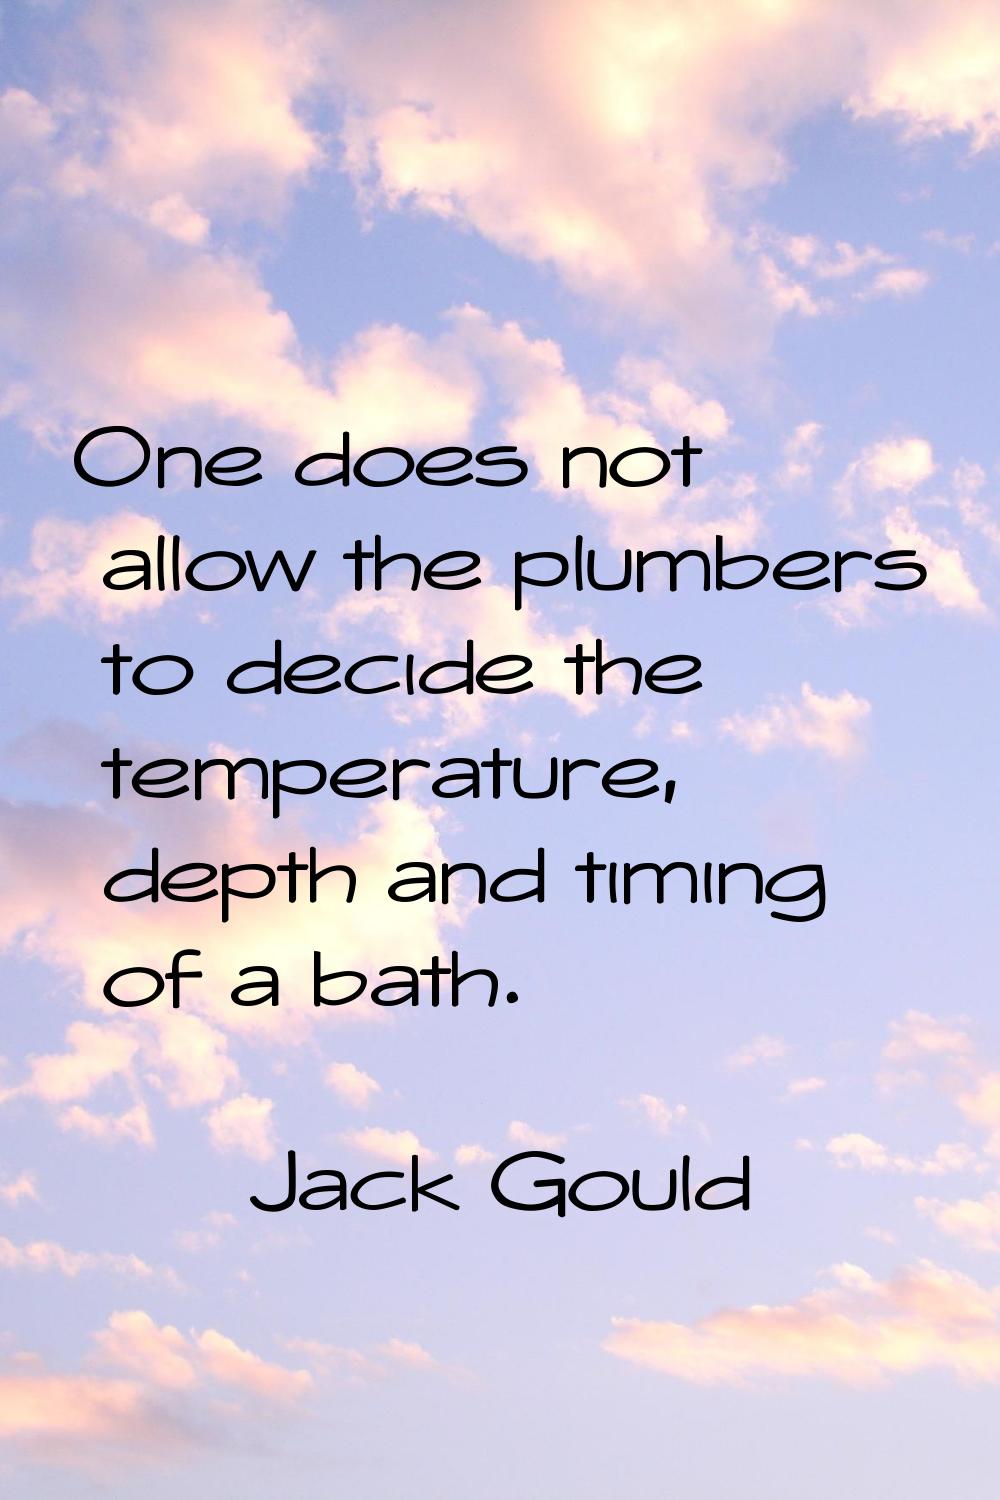 One does not allow the plumbers to decide the temperature, depth and timing of a bath.